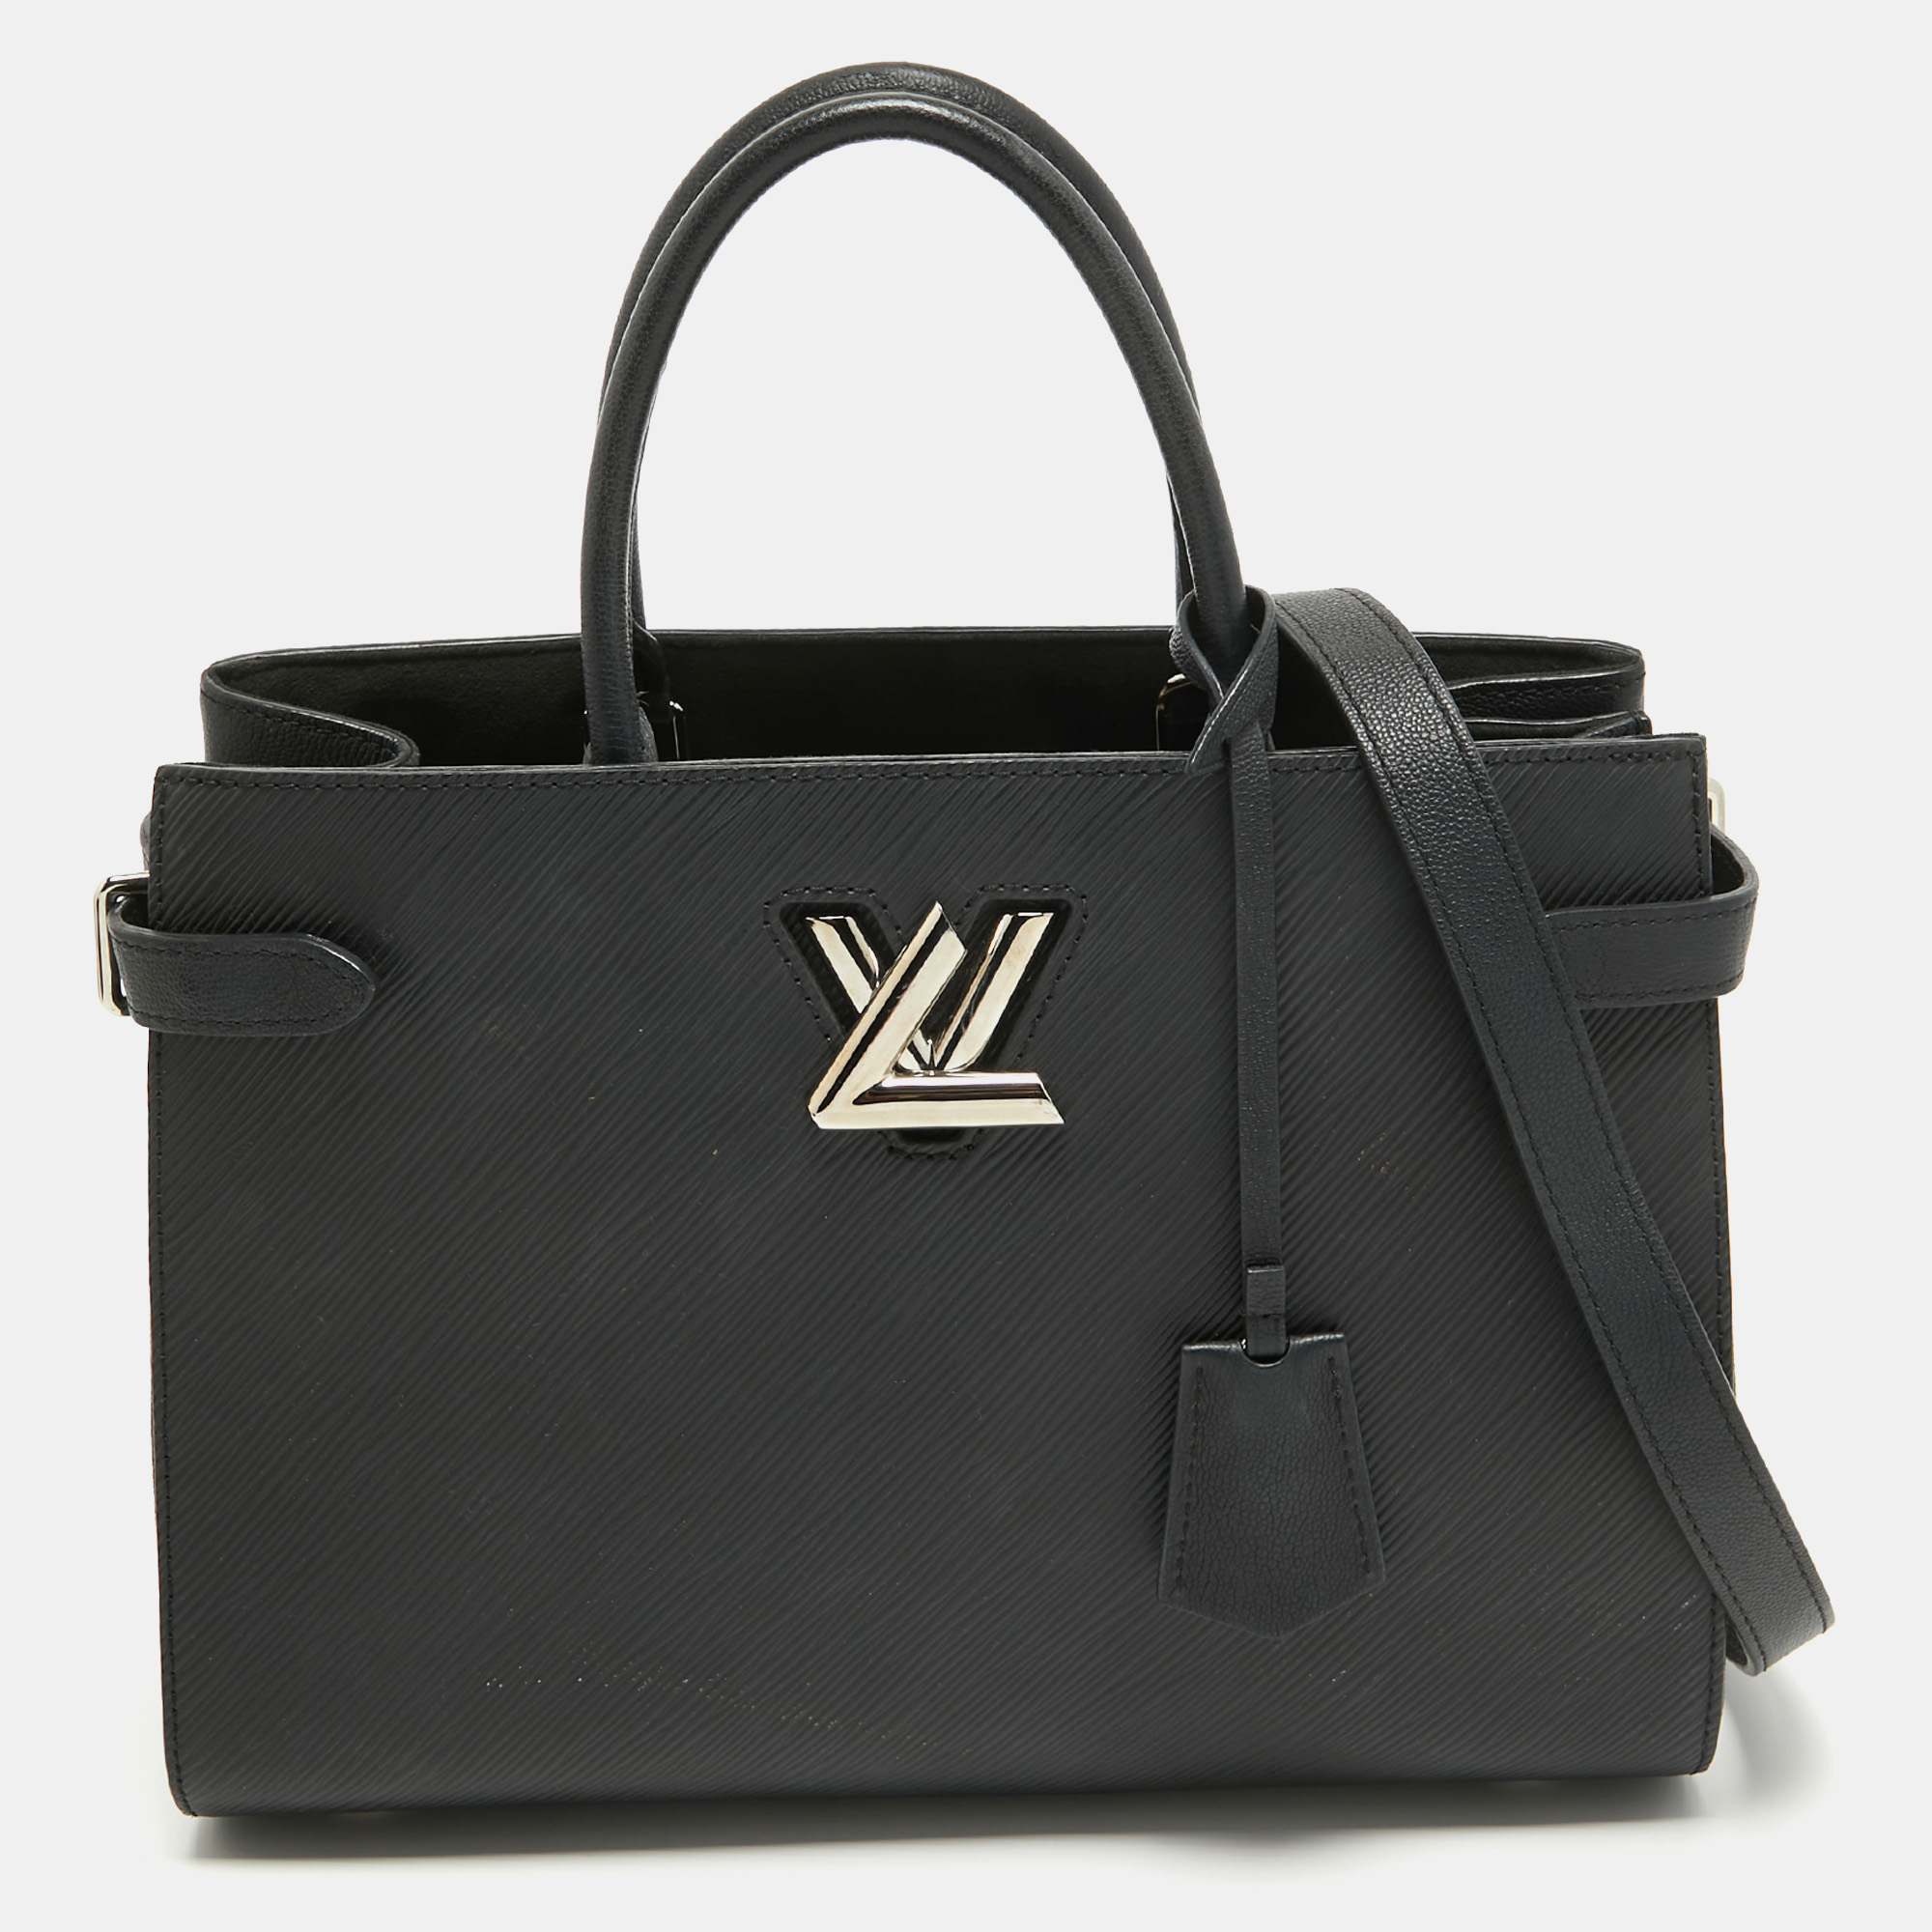 Carry everything you need in style thanks to this Louis Vuitton Twist tote. Crafted from the best materials this is an accessory that promises enduring style and usage.